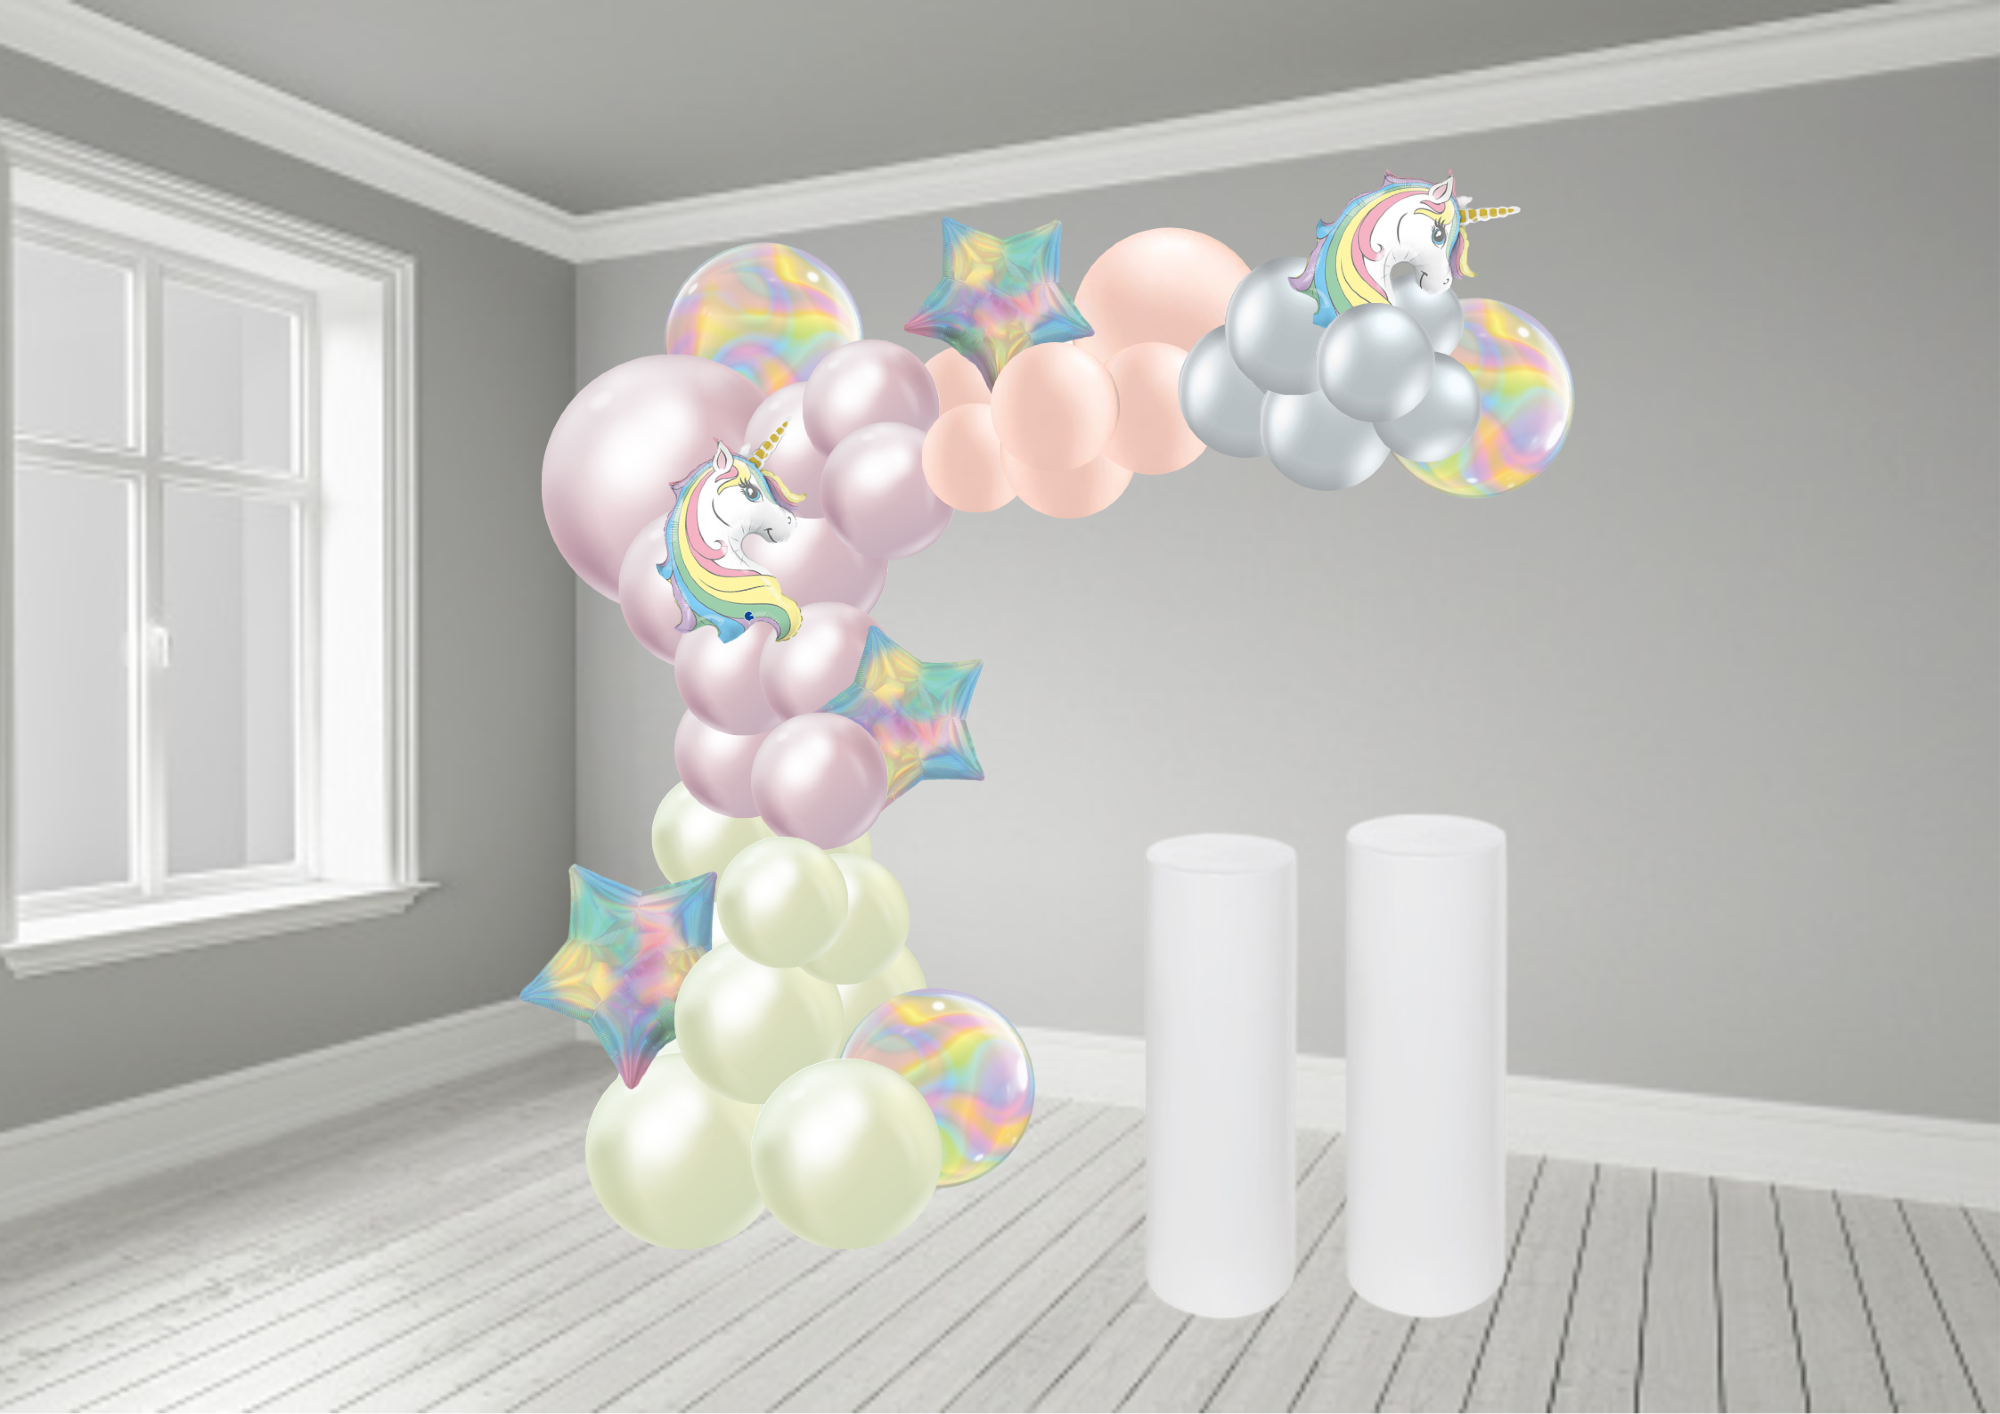 Half balloon arch with theme and cake stands